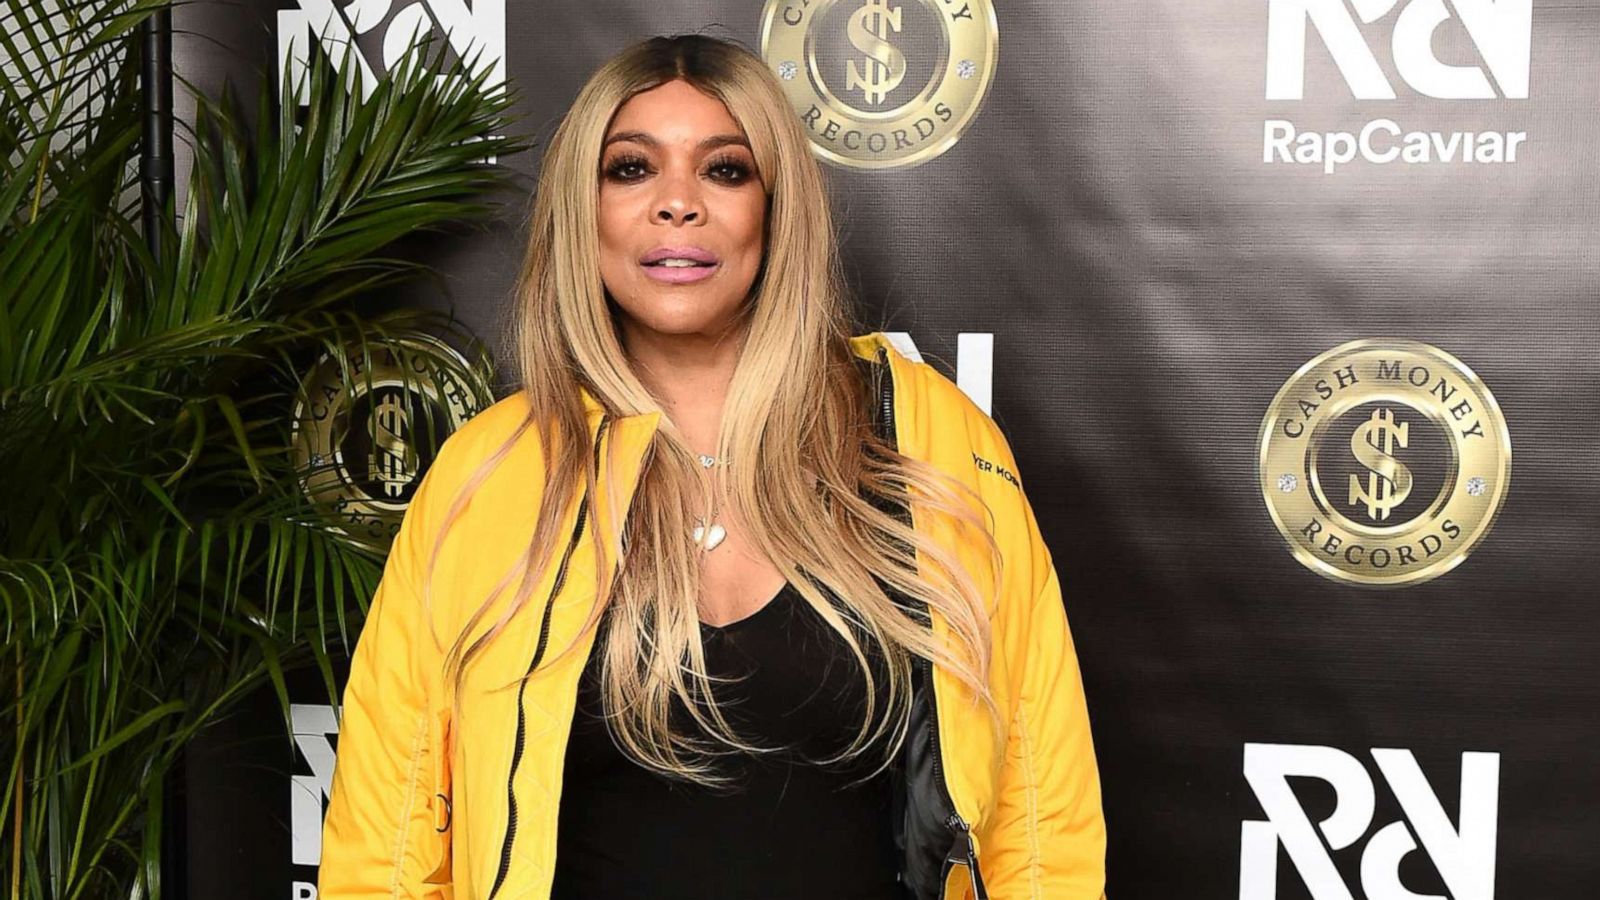 PHOTO: In this Feb. 20, 2020, file photo, Wendy Williams attends Spotify x Cash Money Host Premiere of mini-documentary New Cash Order at Lightbox in New York.